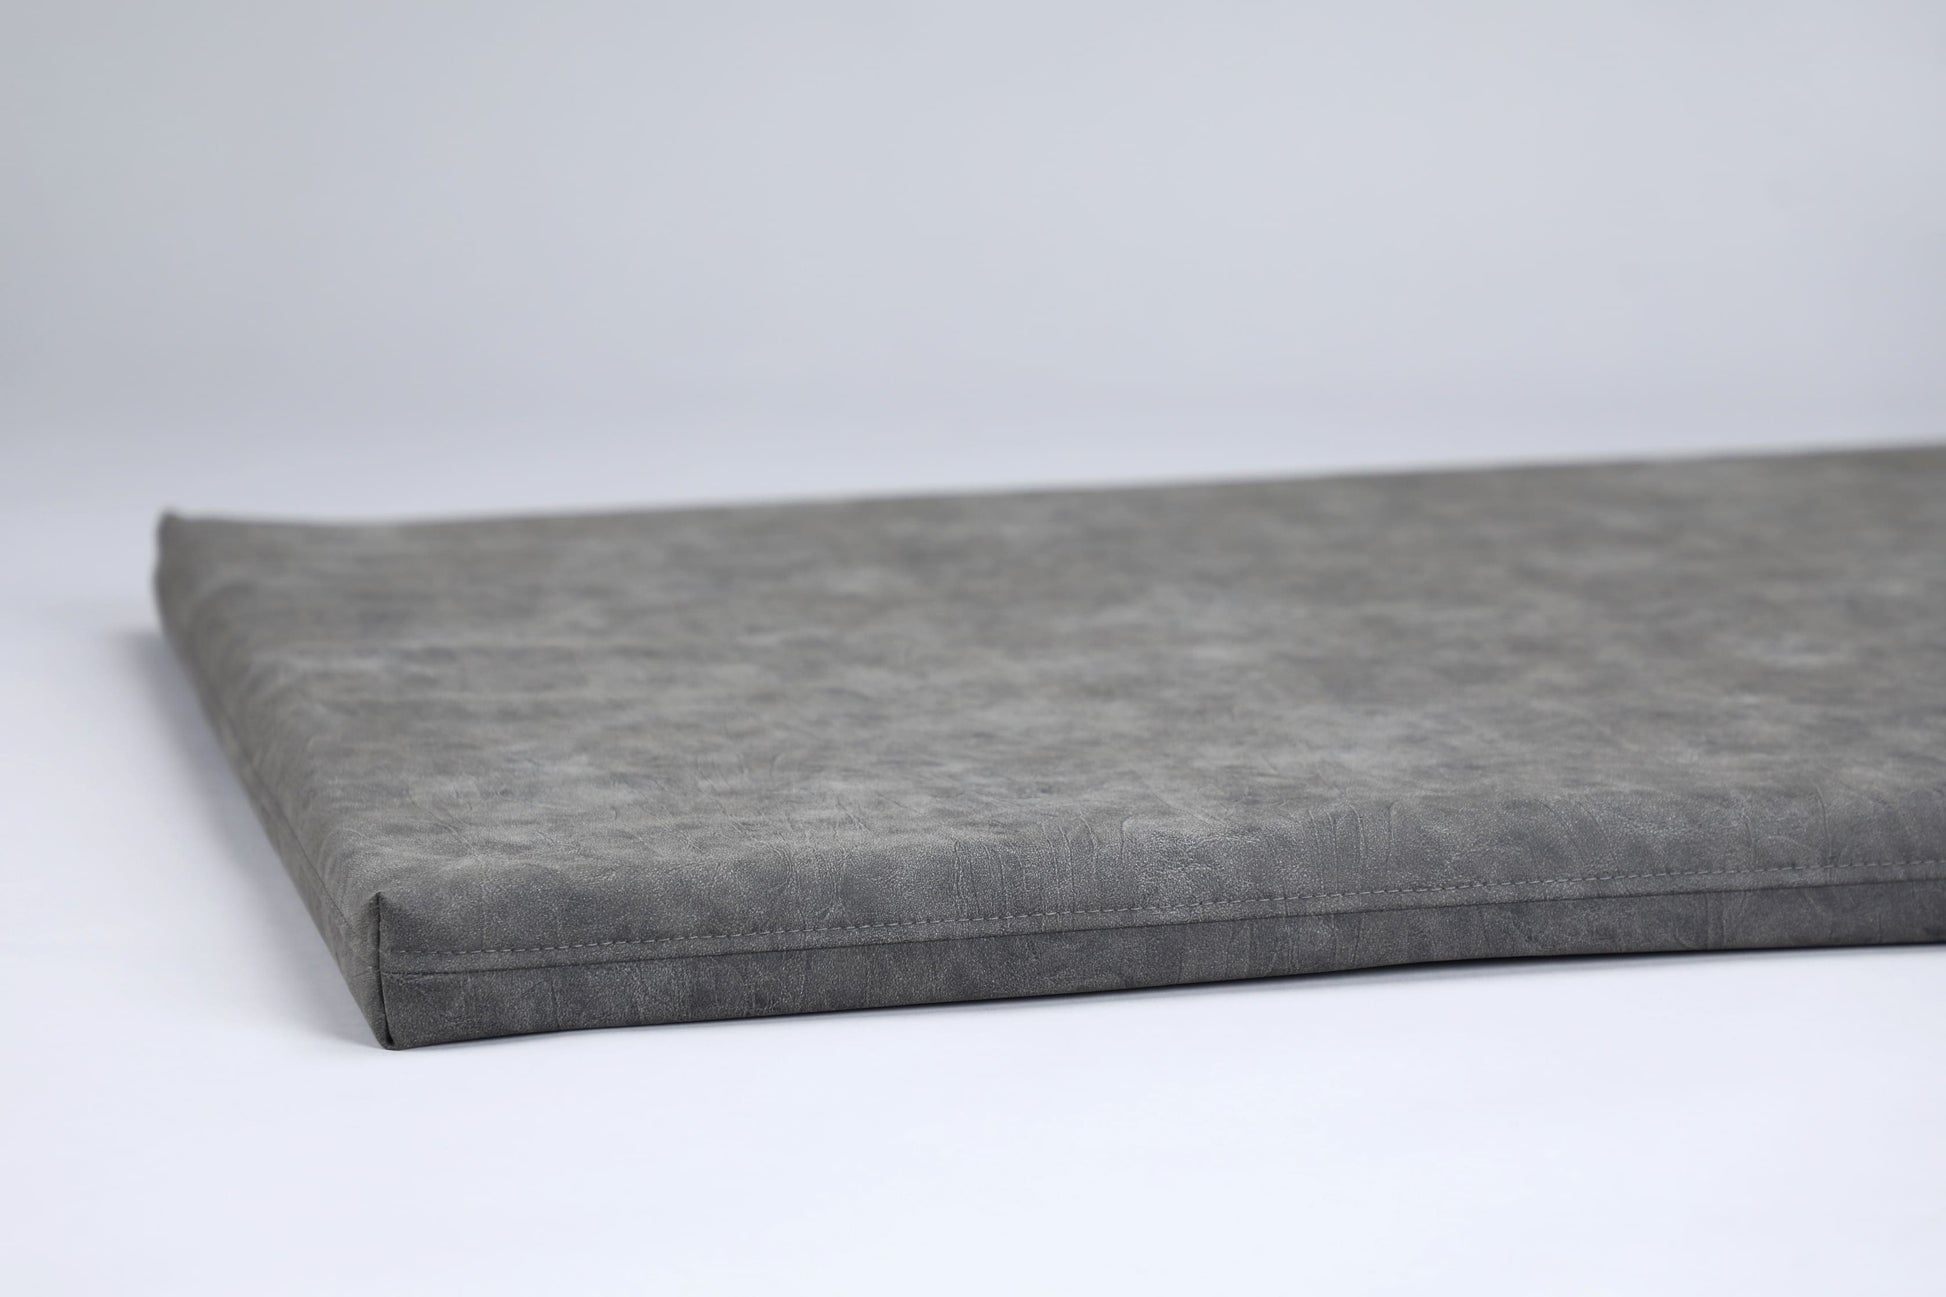 2-sided crate & travel leather dog bed. IRON GREY - European handmade dog accessories by My Wild Other